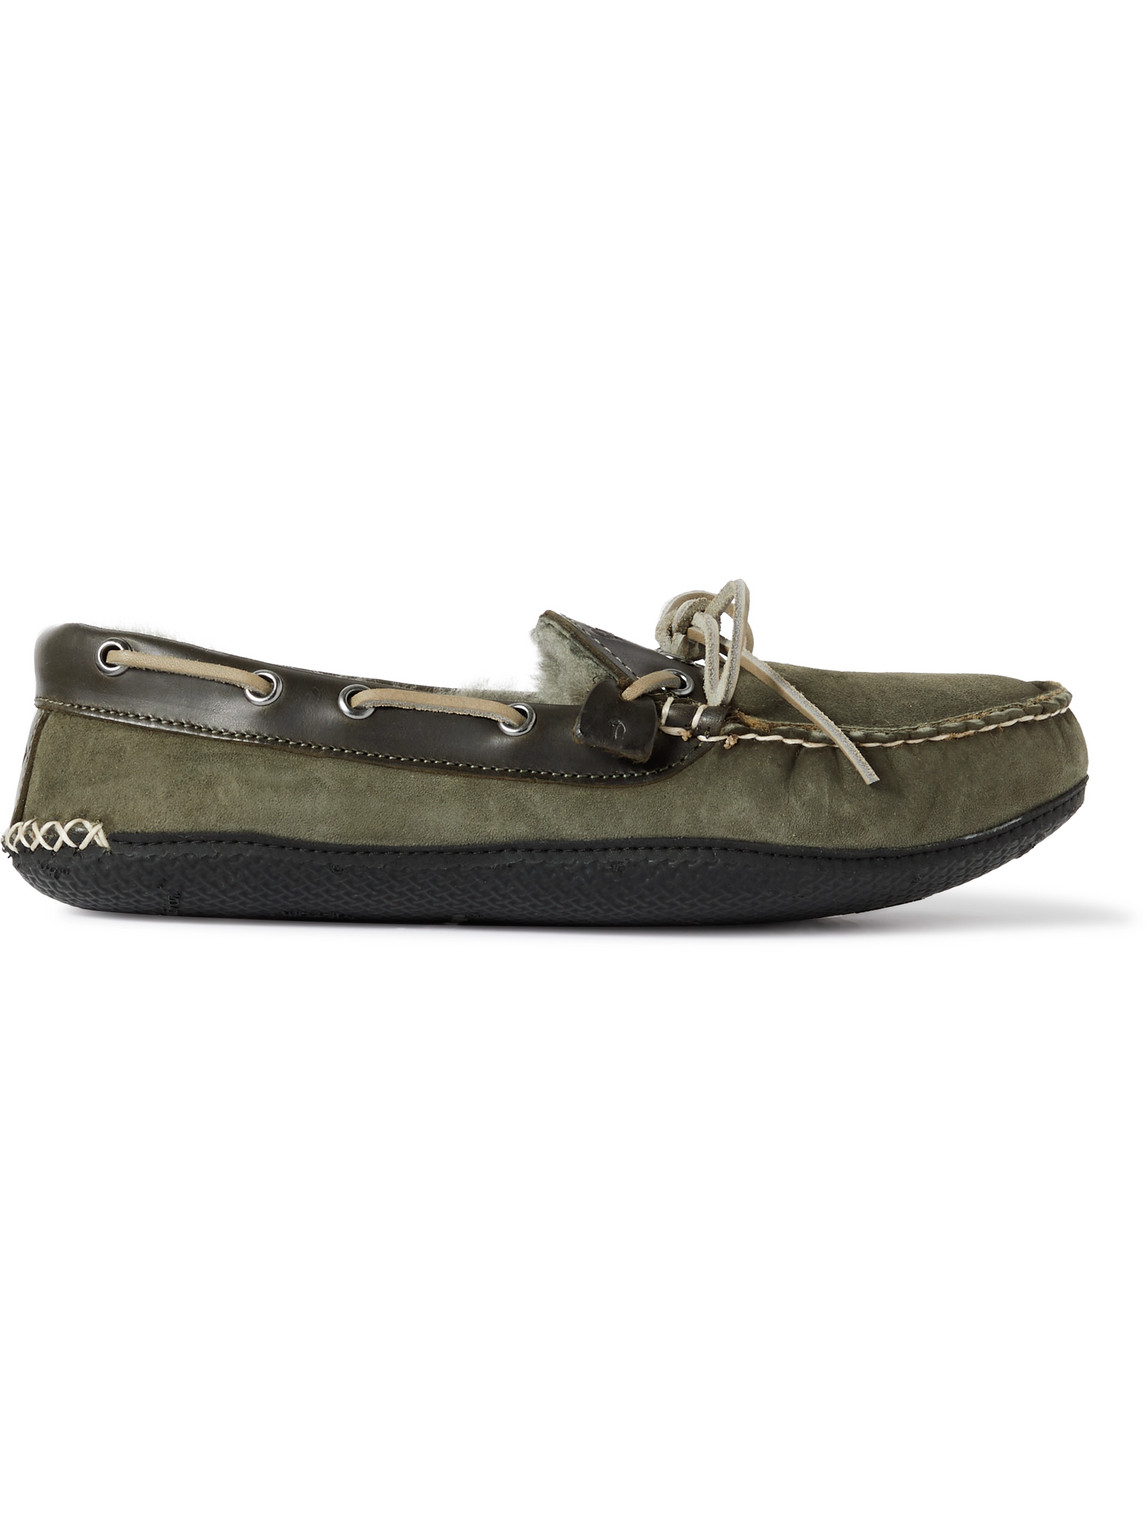 QUODDY FIRESIDE SHEARLING-LINED LEATHER-TRIMMED SUEDE SLIPPERS